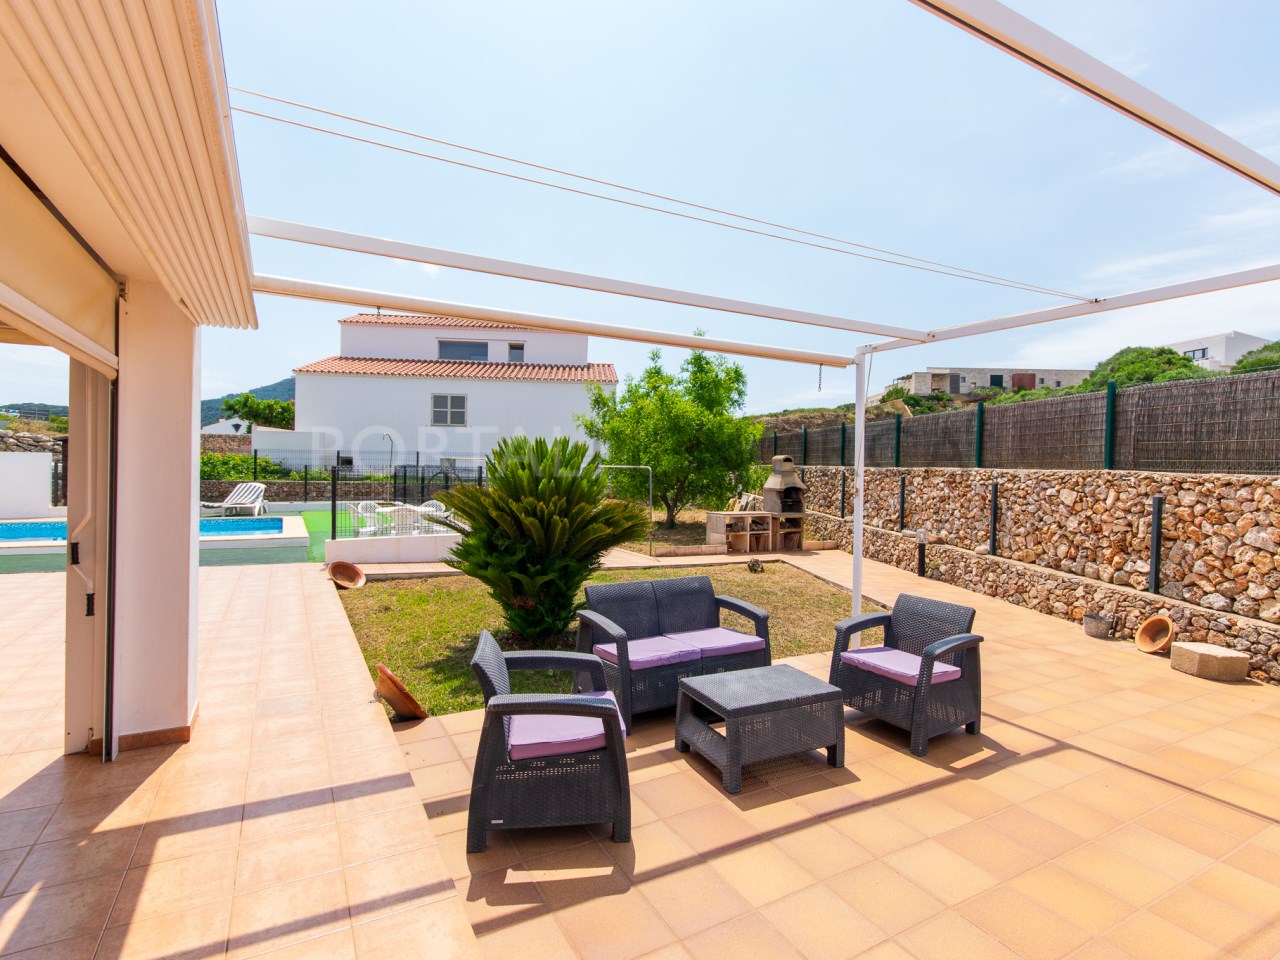 Terrace of a Menorcan house with pool and garage in Mercadal